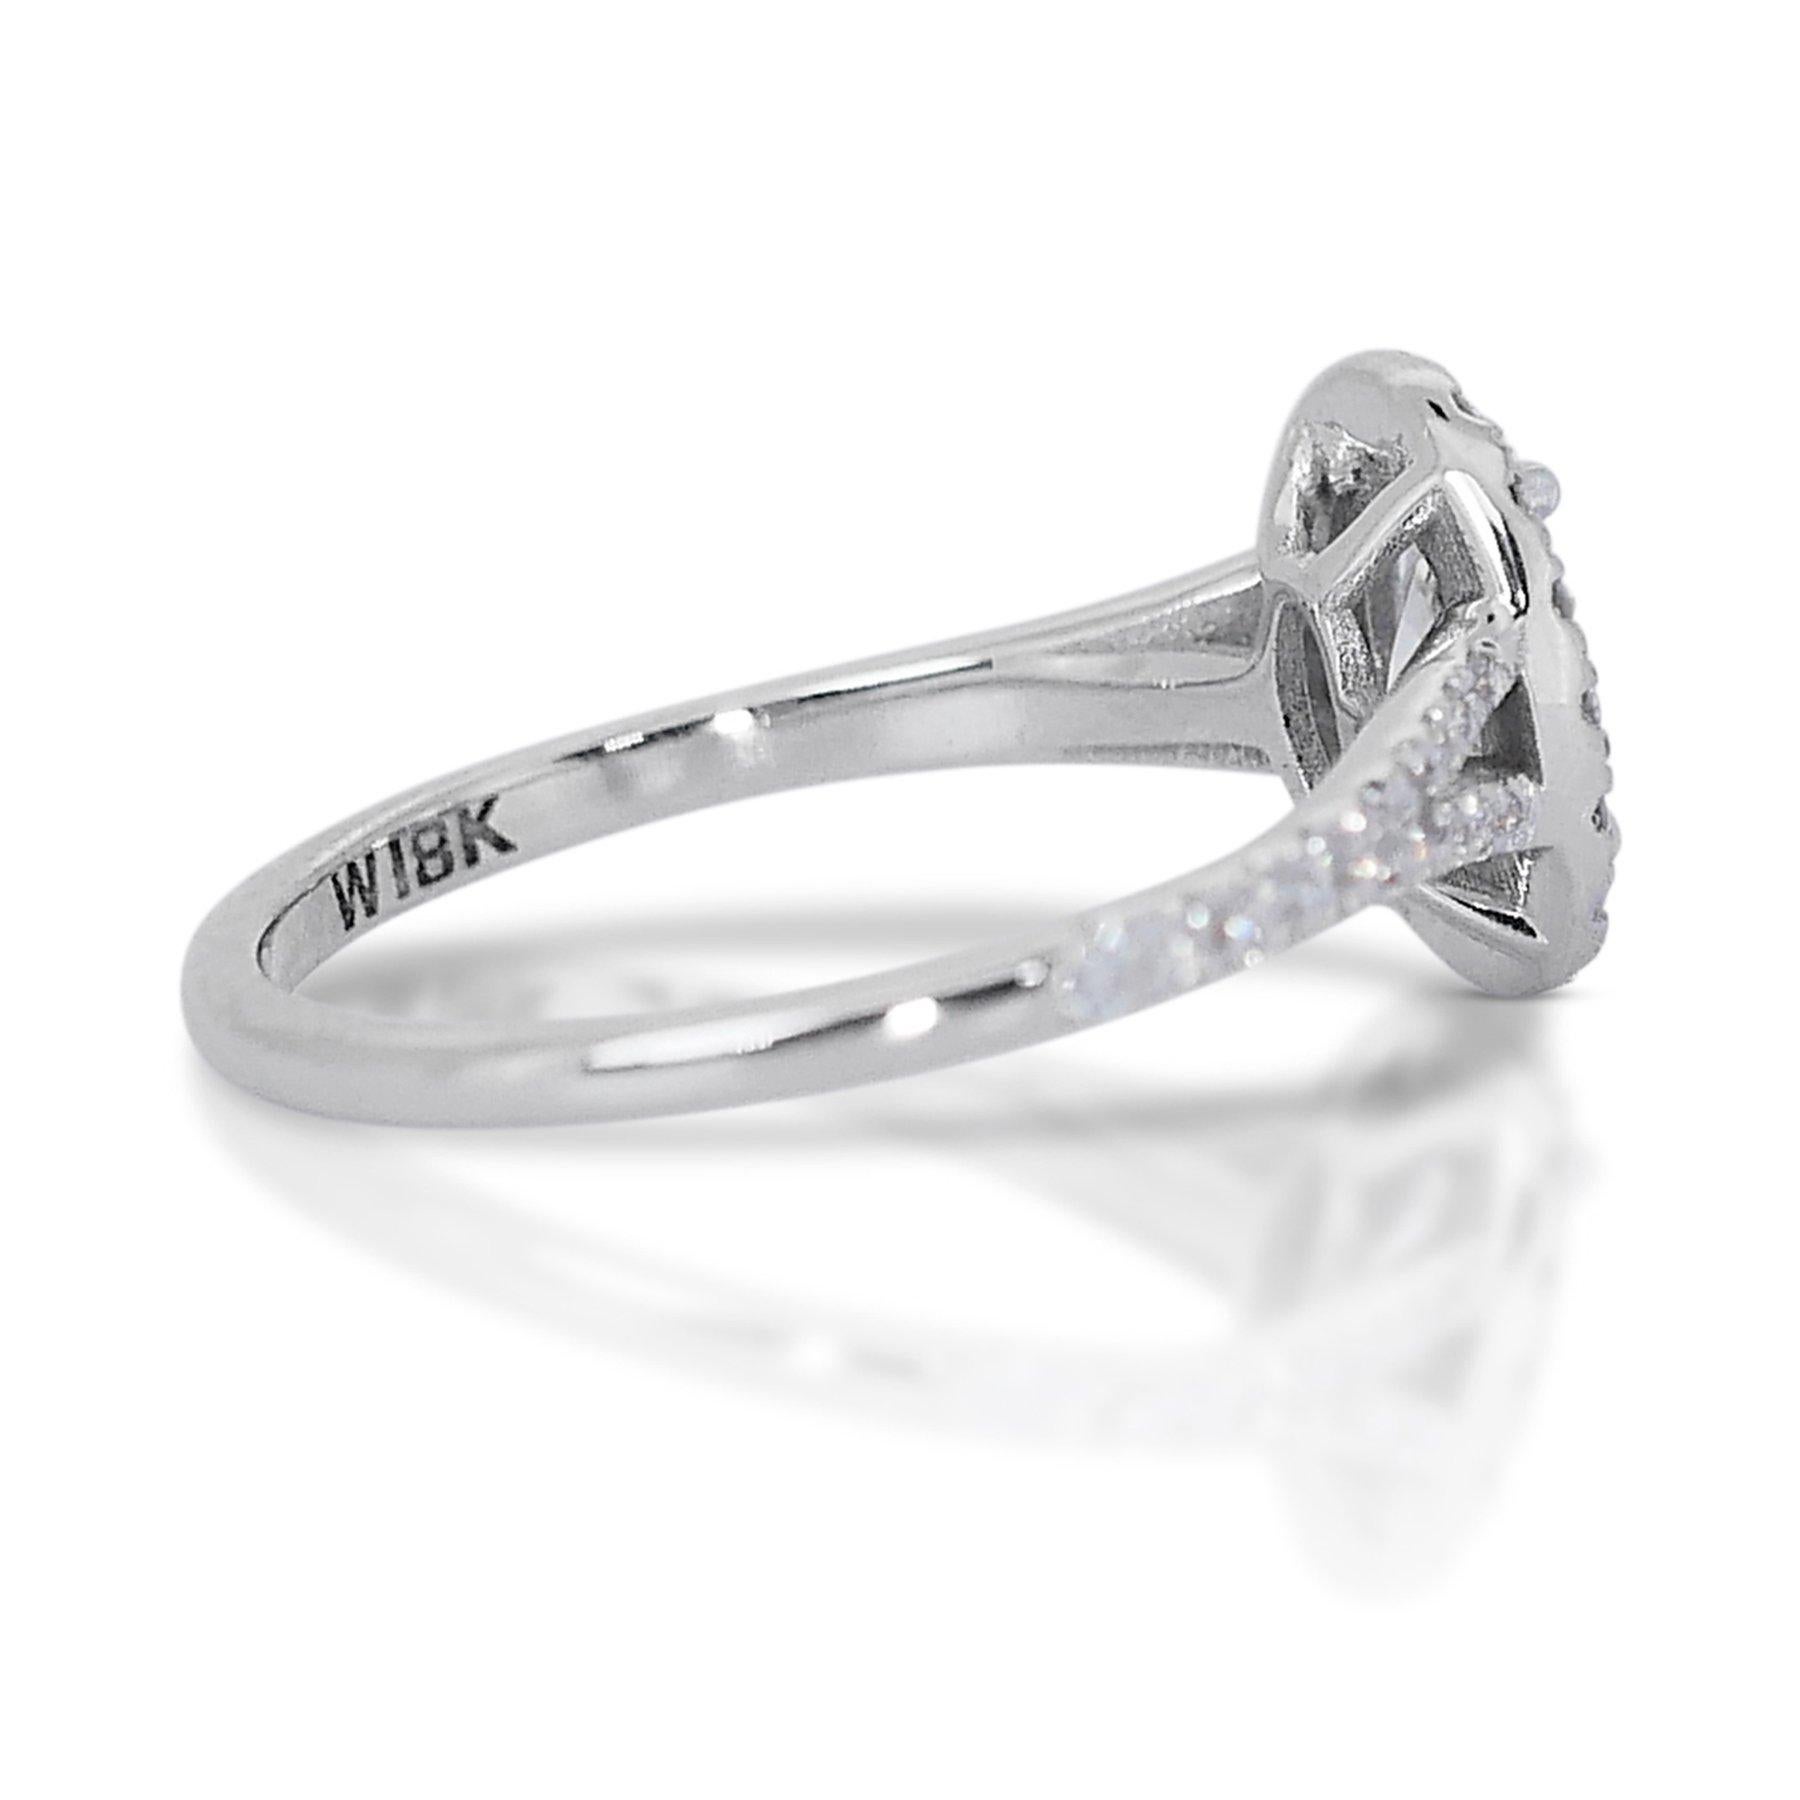 Exquisite 1.04ct Oval Diamond Halo Ring in 18k White Gold - GIA Certified For Sale 2